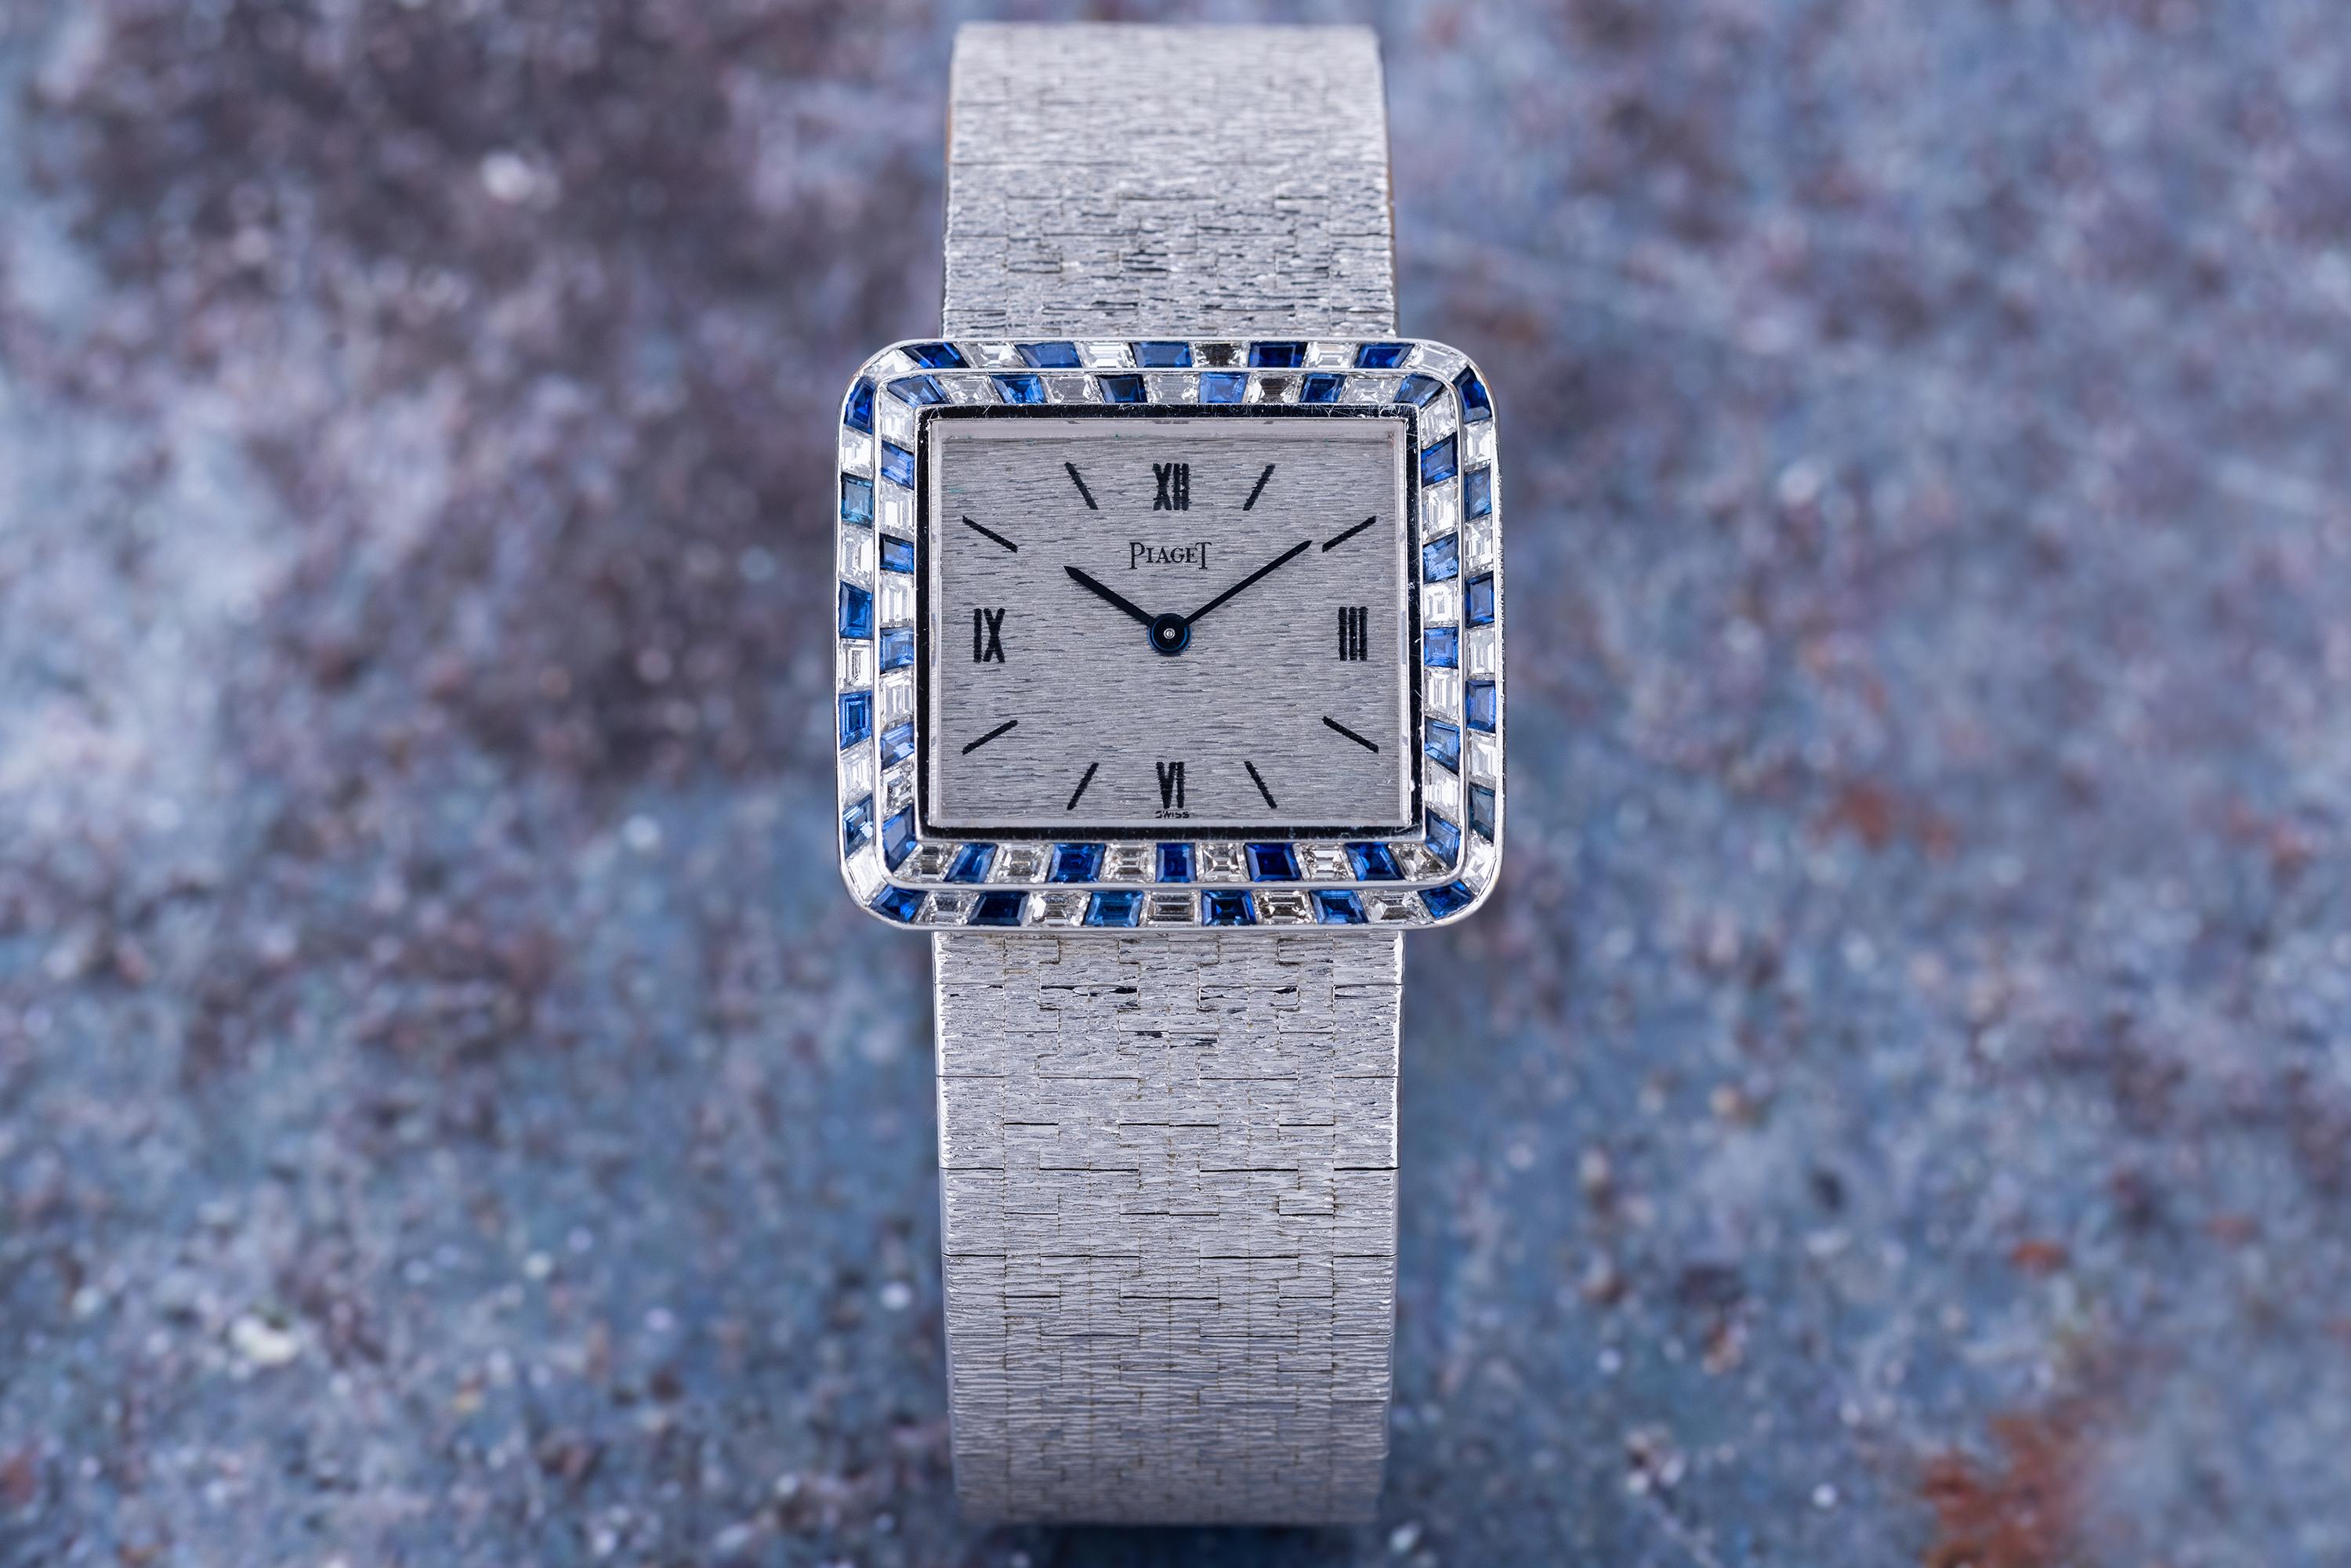 Vintage Piaget  REF. 9366A6  Diamond & Sapphire Bezel  18k White Gold  30mm  1970's

Pre-owned, excellent condition Piaget reference 9366A6 18k white gold gents wristwatch circa 1970's. An 18k White Gold etched dial, Roman numeral and baton hour